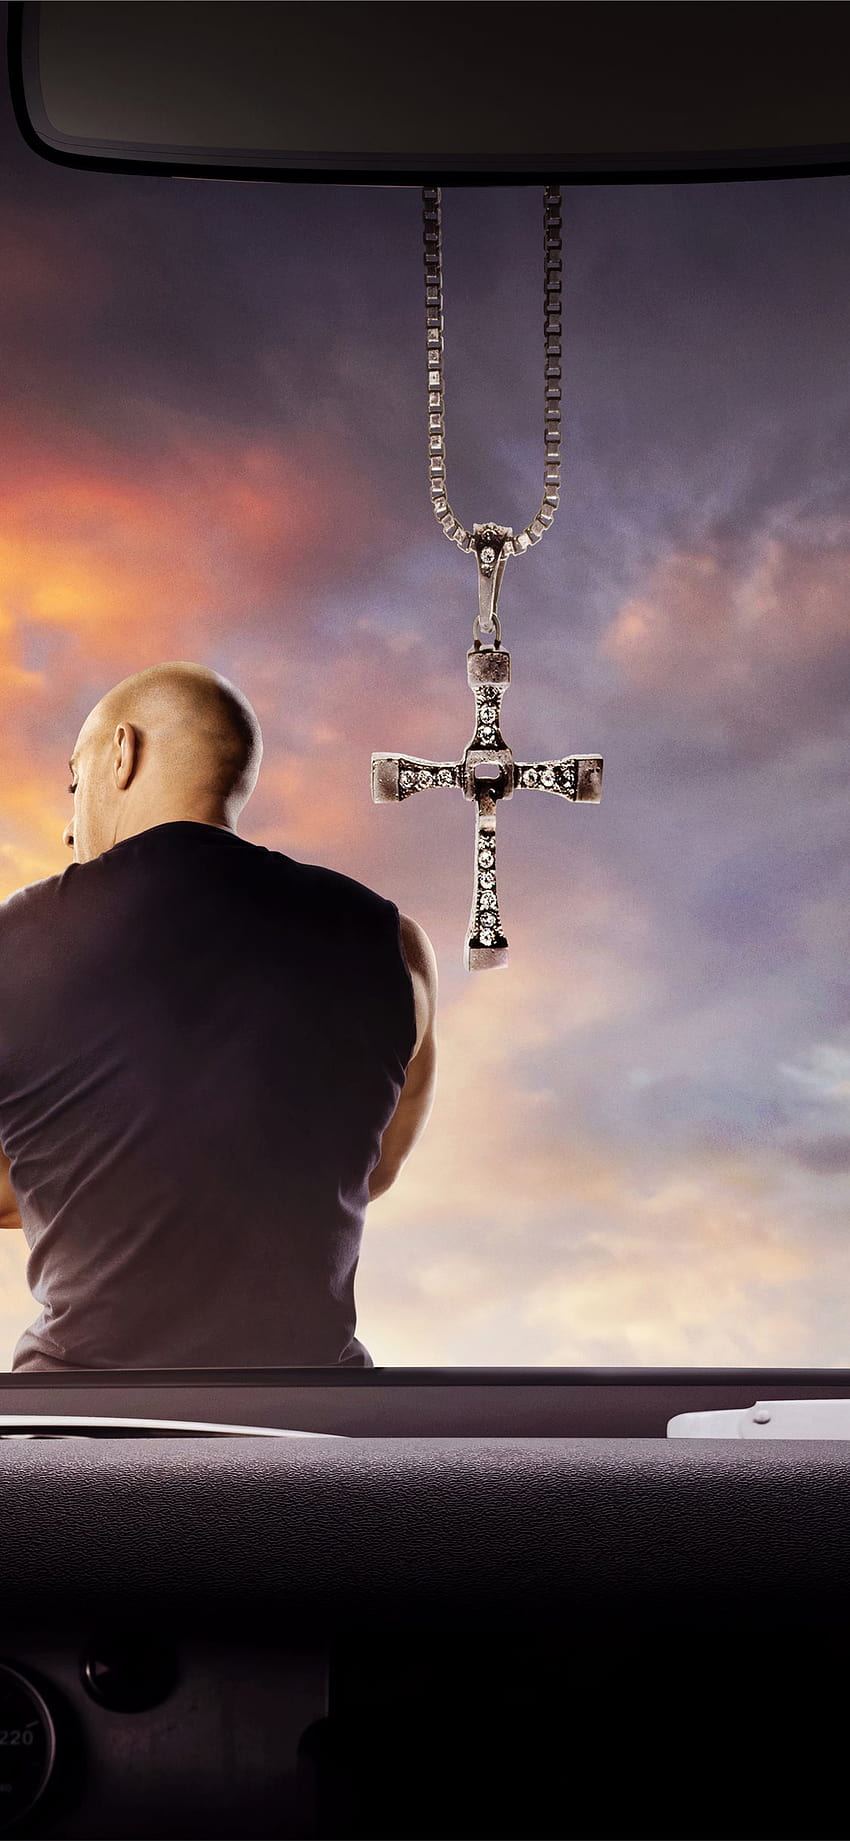 fast and furious 9 2020 movie iPhone X, cross necklace HD phone wallpaper